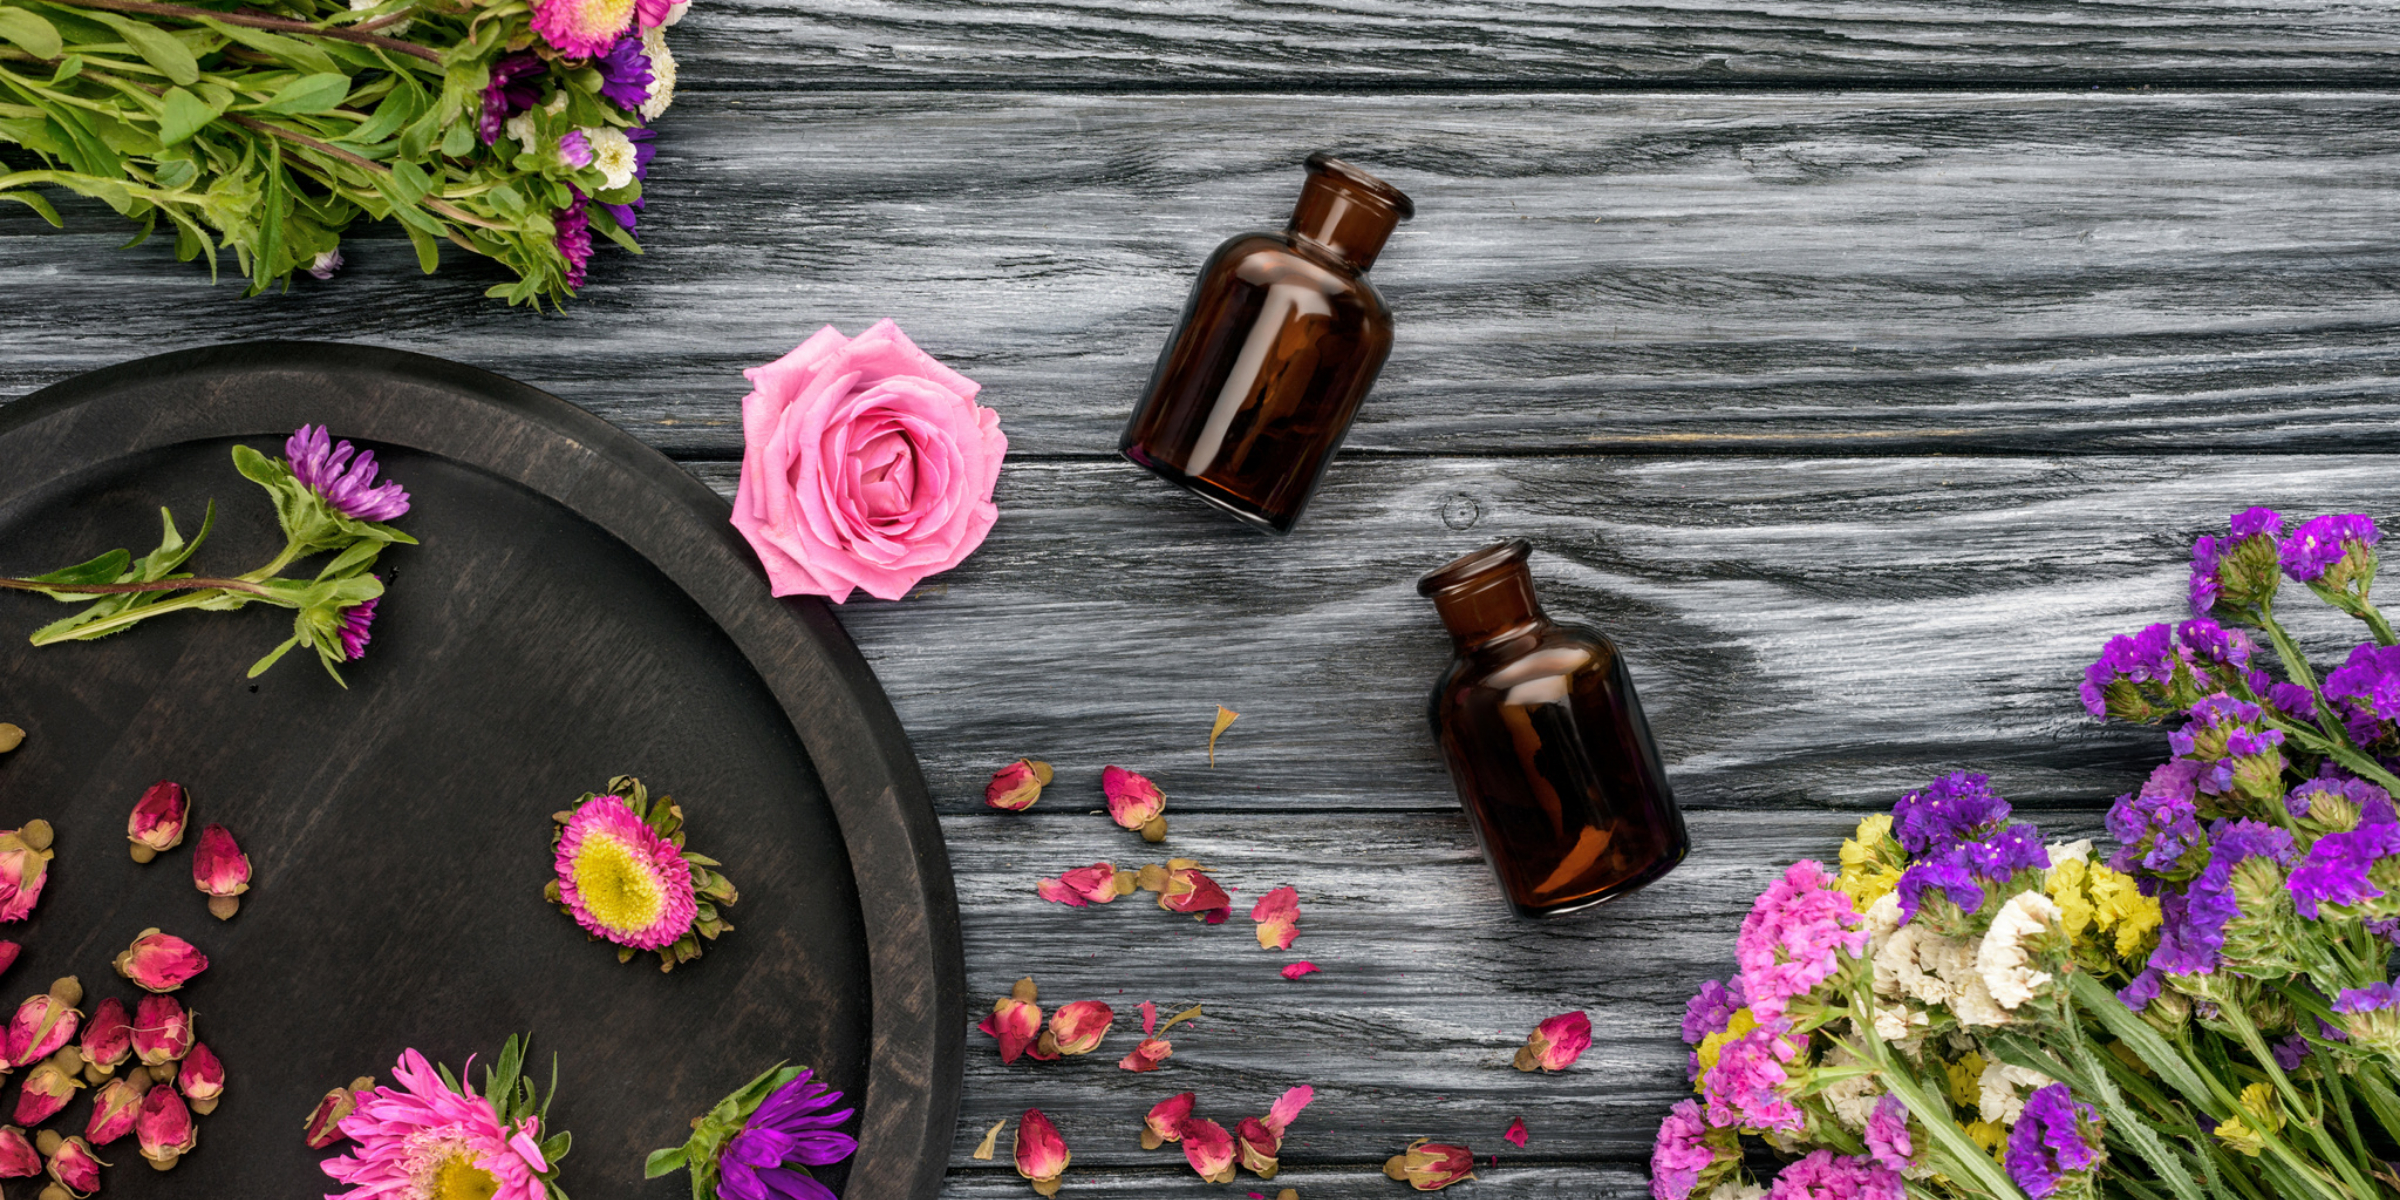 Essential oils and flowers on a wooden table.